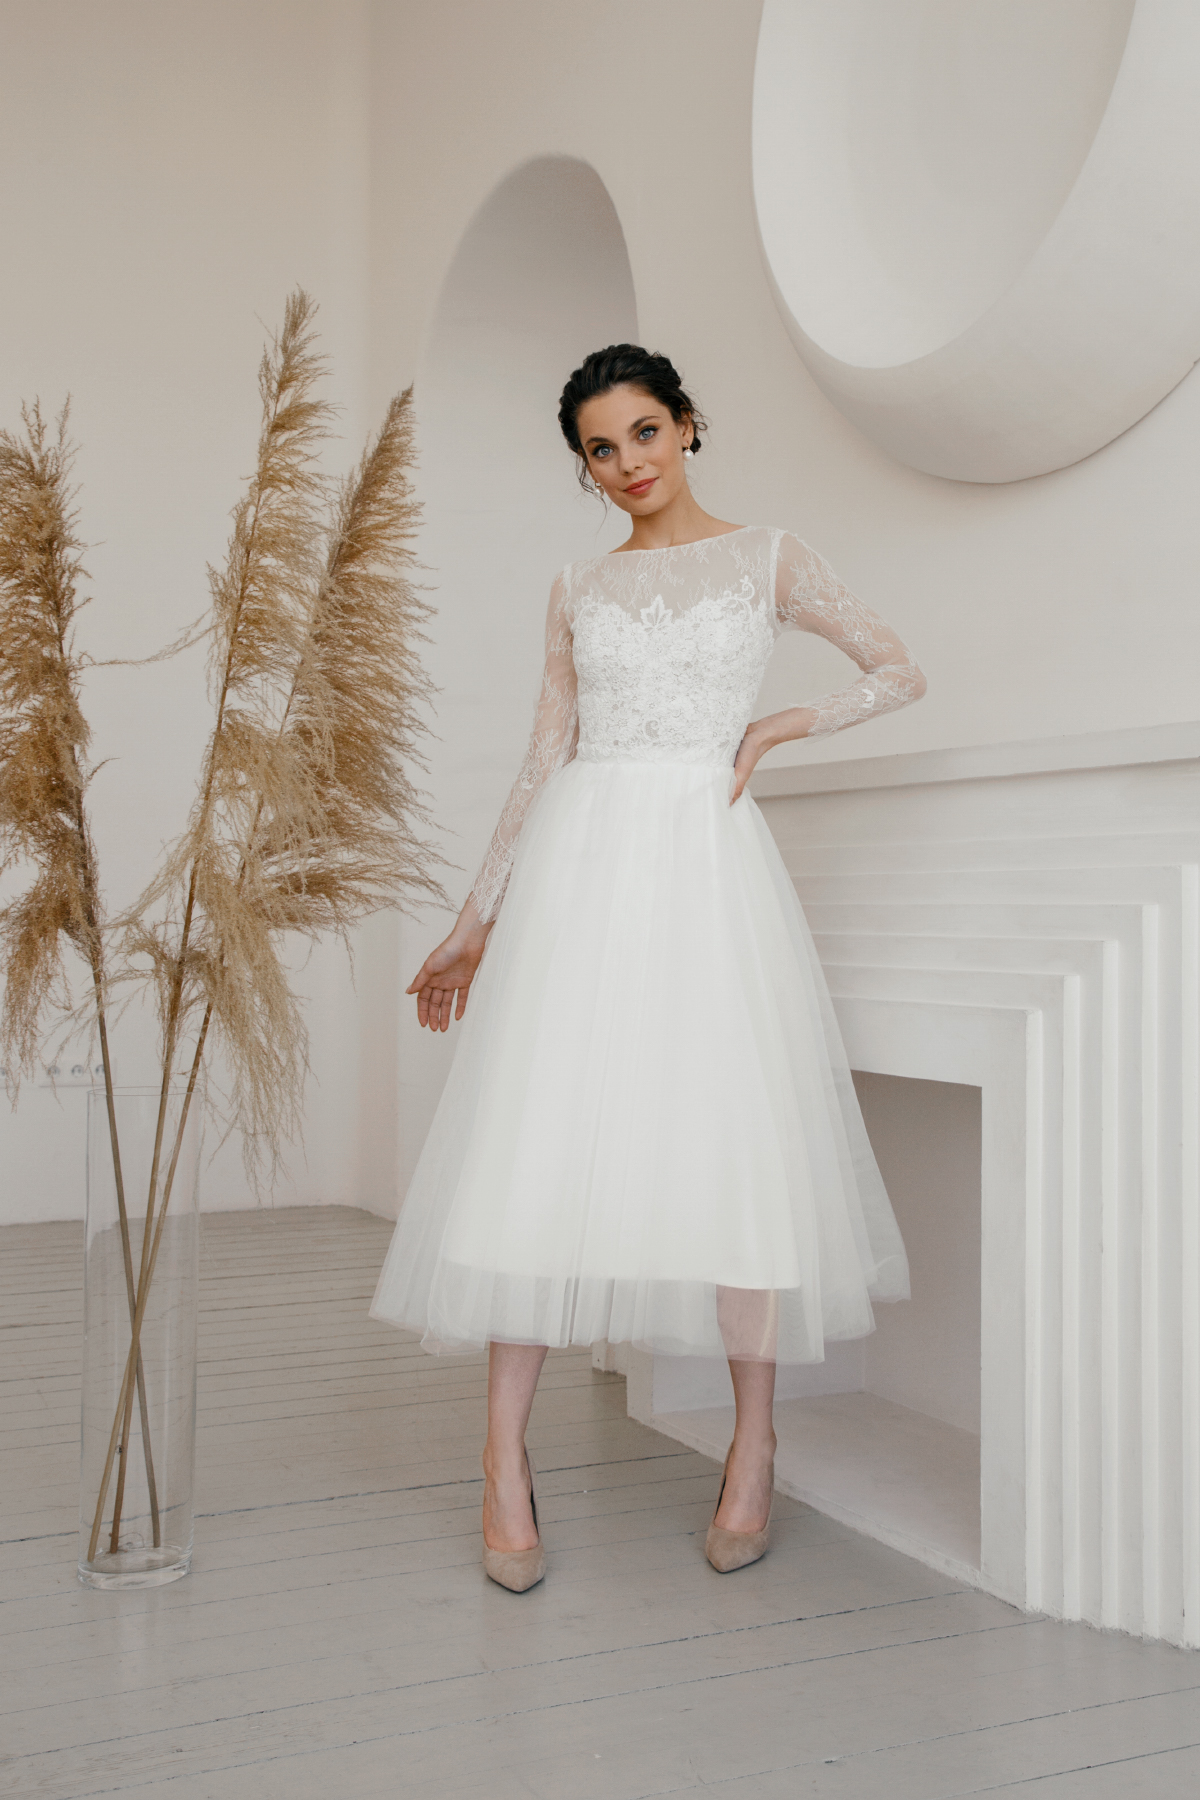 Short, Simple Wedding Dress Made of Satin, Tea-length Wedding Dress With  Sleeves, Fitted, Midi Wedding Dress With V-neck Sakura Dress 